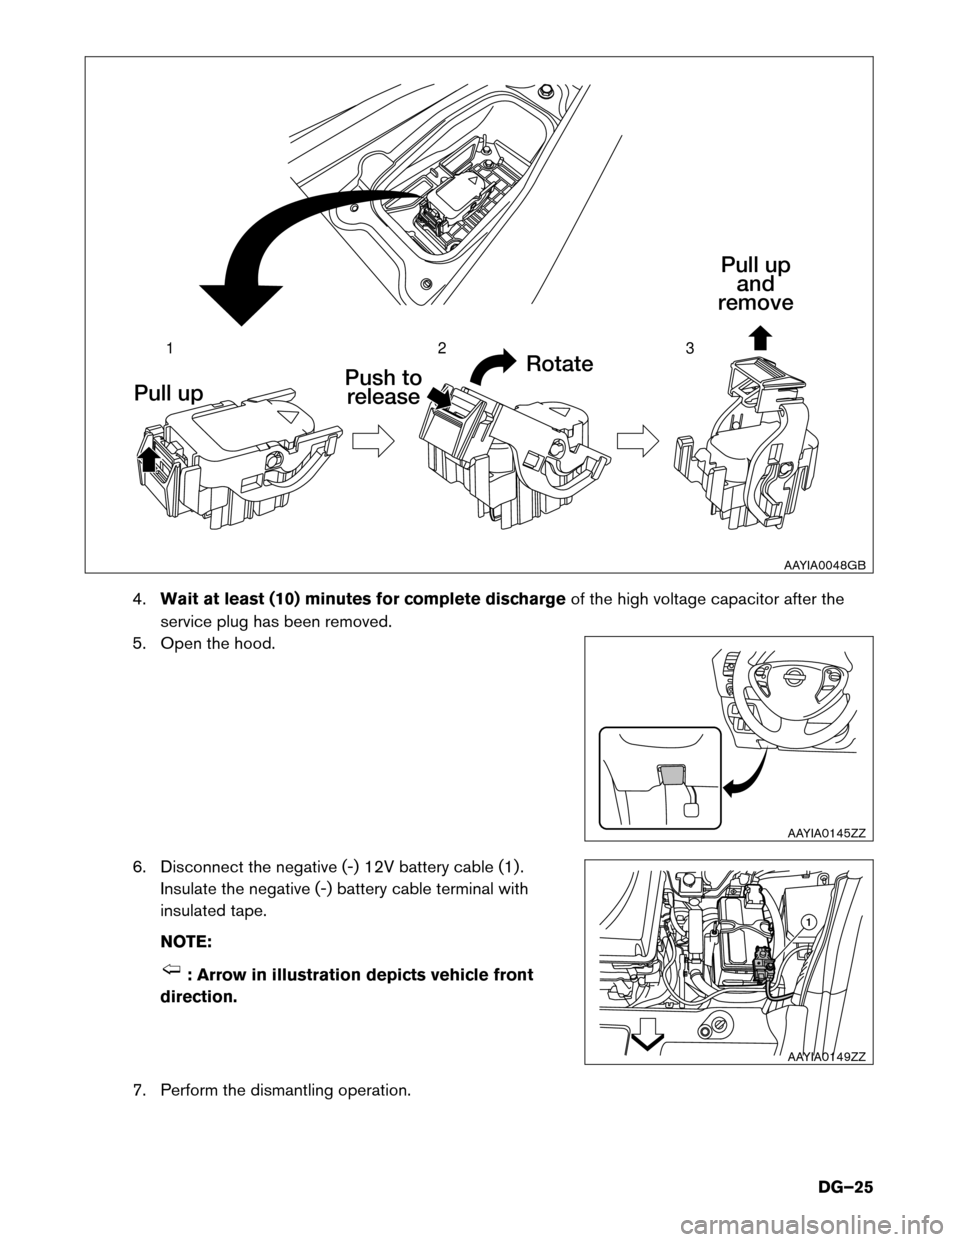 NISSAN LEAF 2014 1.G Dismantling Guide 4.
Waitat least (10) minutes for complete discharge of the high voltage capacitor after the
service plug has been removed.
5. Open the hood.
6. Disconnect the negative (-) 12V battery cable (1) . Insu